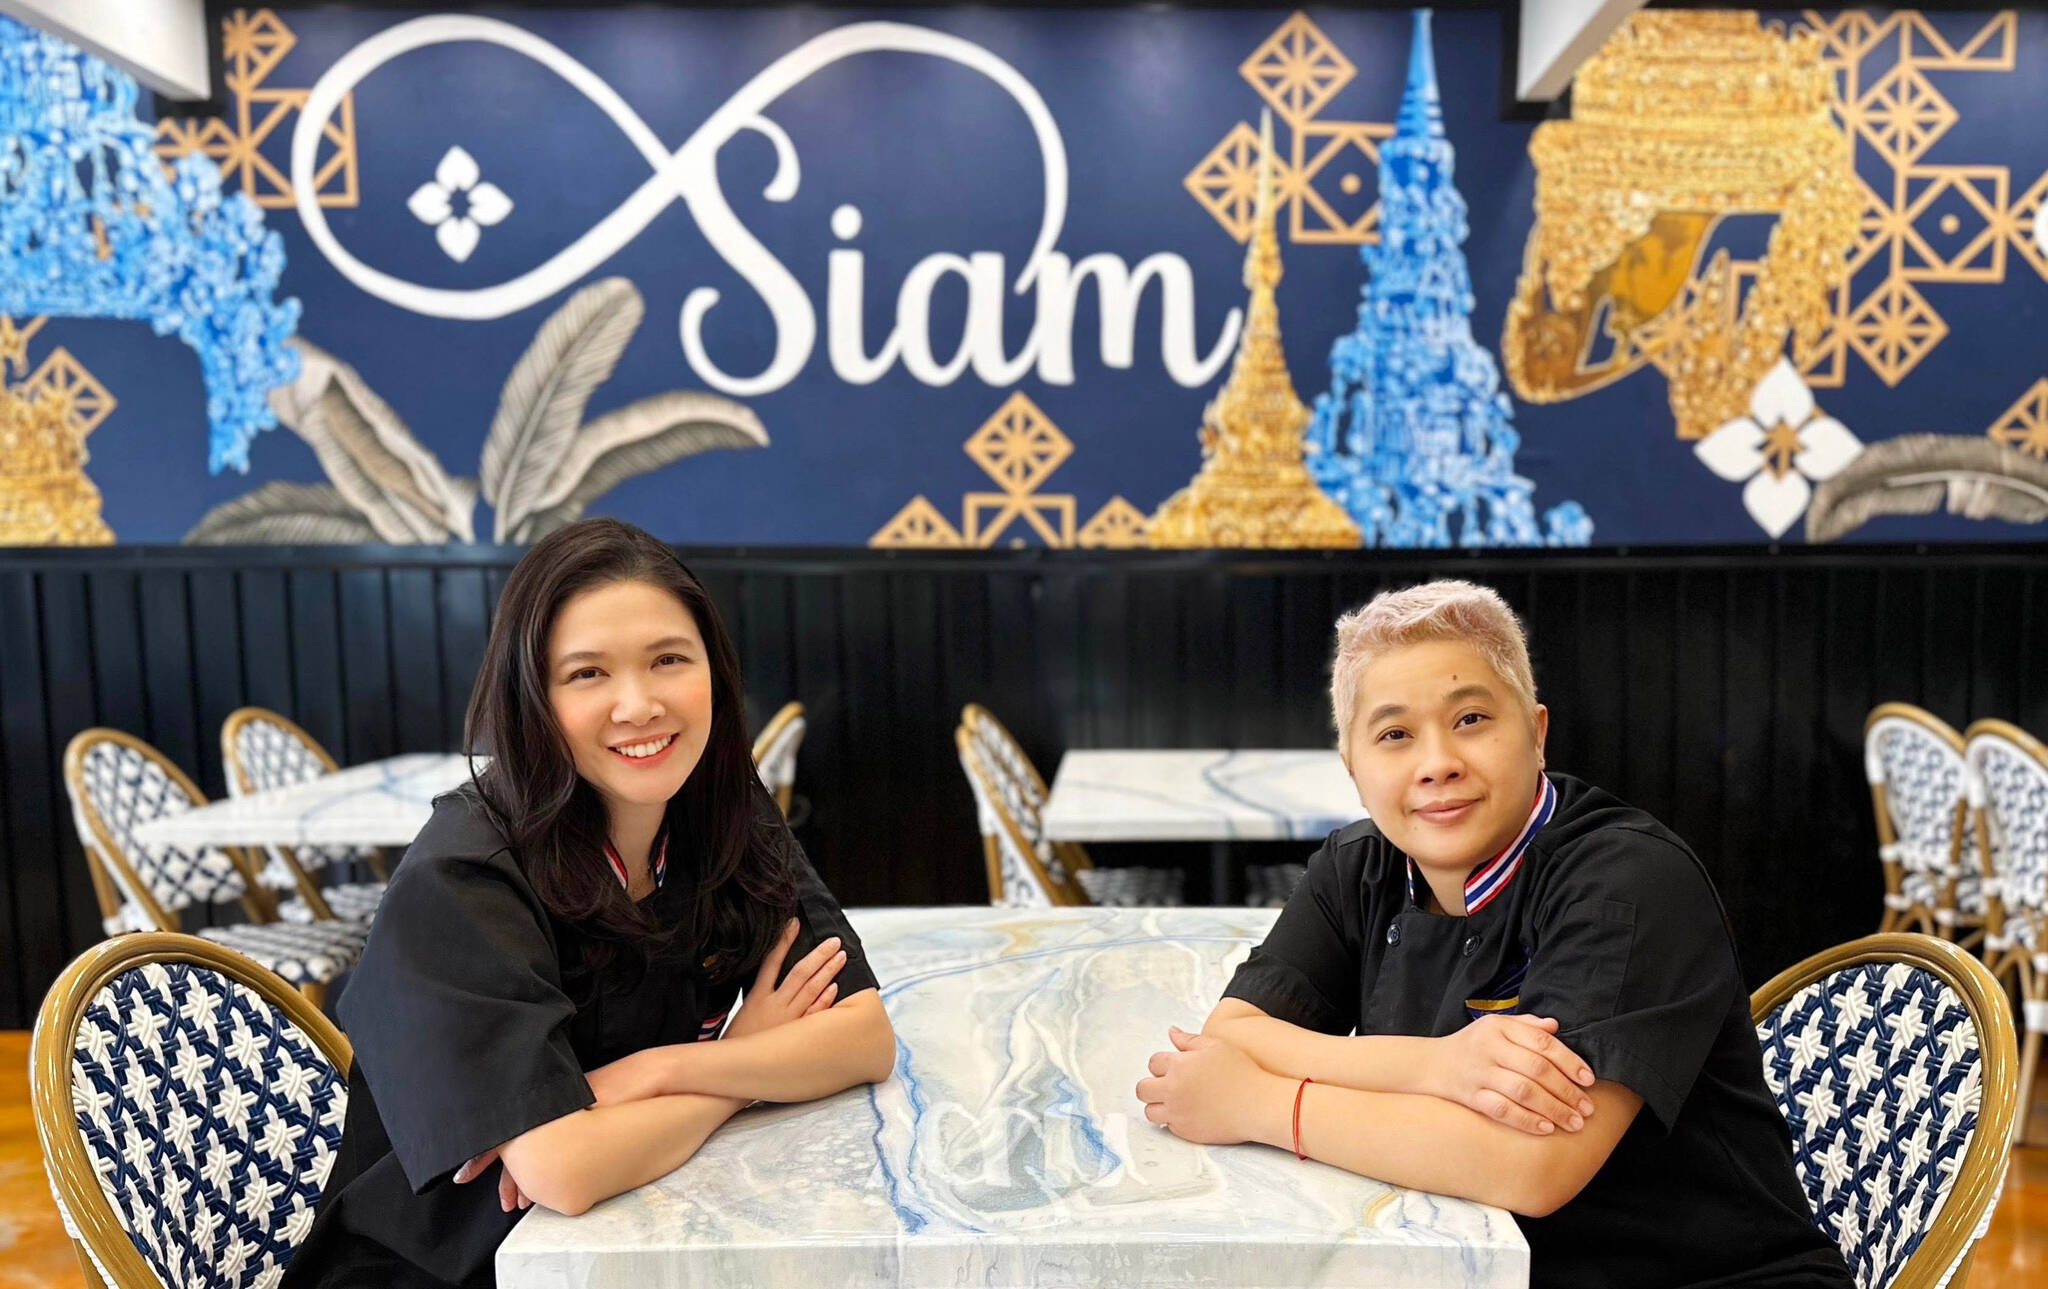 Owners Suwannasa Piwon and Phatcharin Apaipak sit for a photo at the new location of their Siam Noodles and Food in Soldotna, Alaska. (Photo provided by Siam Noodles and Food)